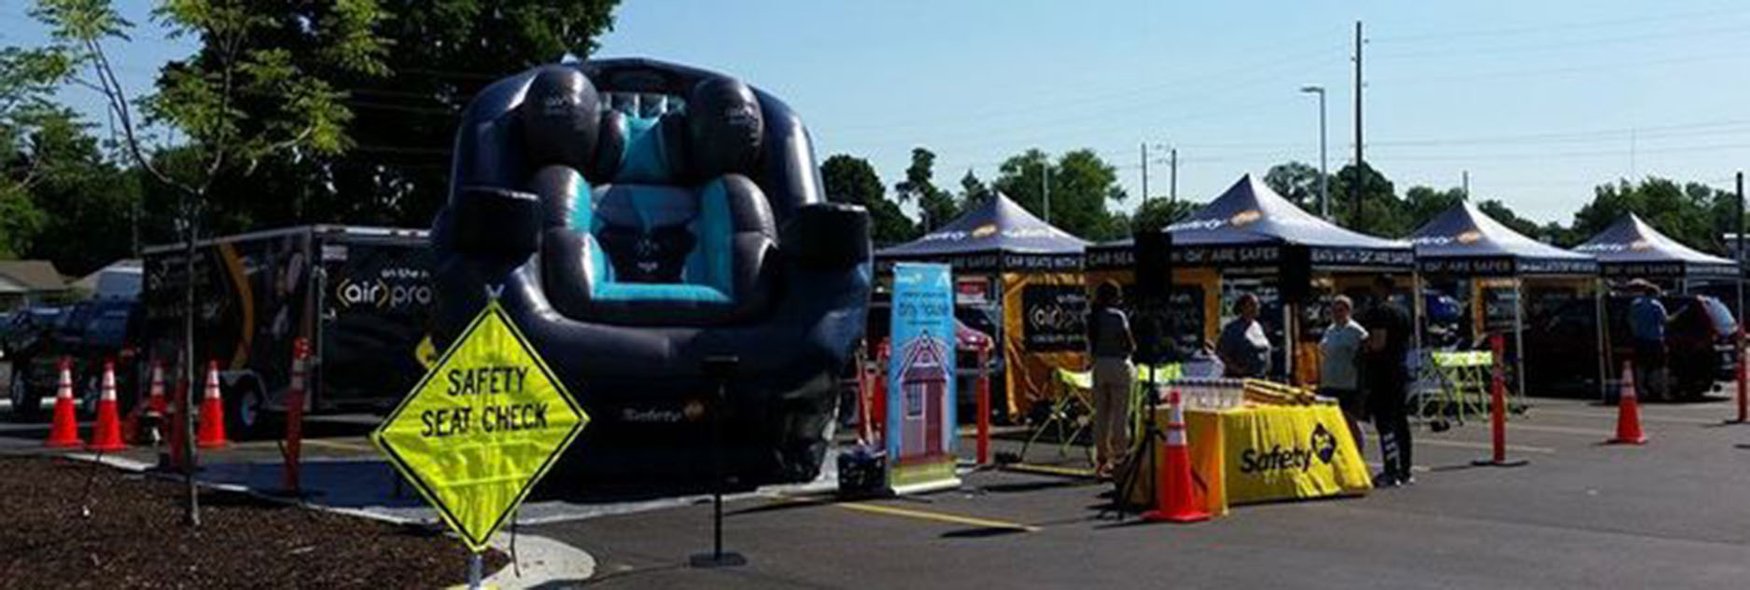 inflatable-car-seat-at-event.jpg